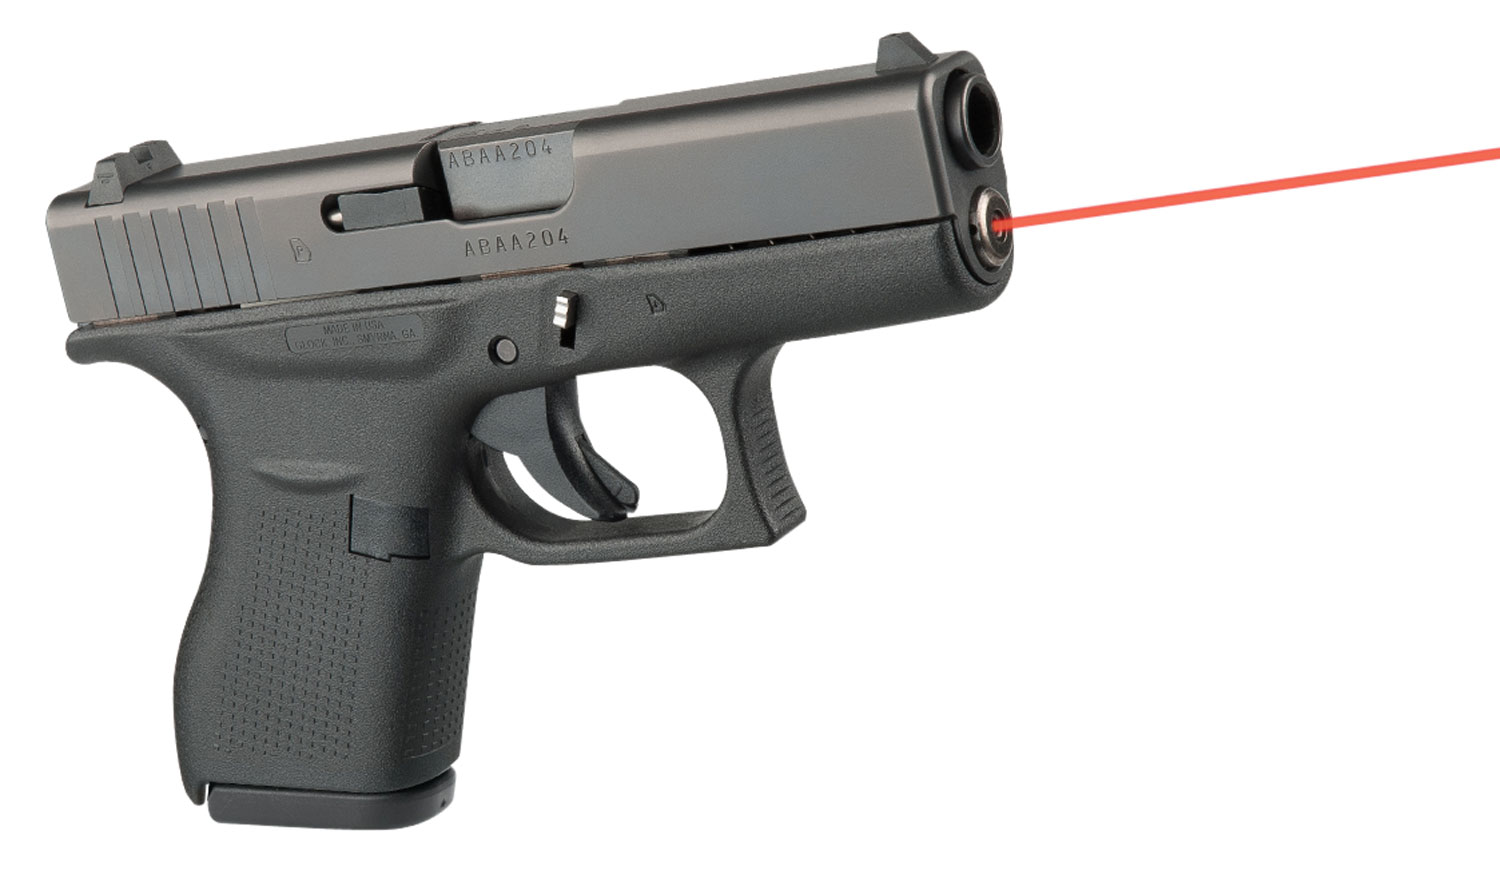 LaserMax LMSG42 Guide Rod Laser 5mW Red Laser with 650nM Wavelength & Made of Stainless Steel for Glock 42